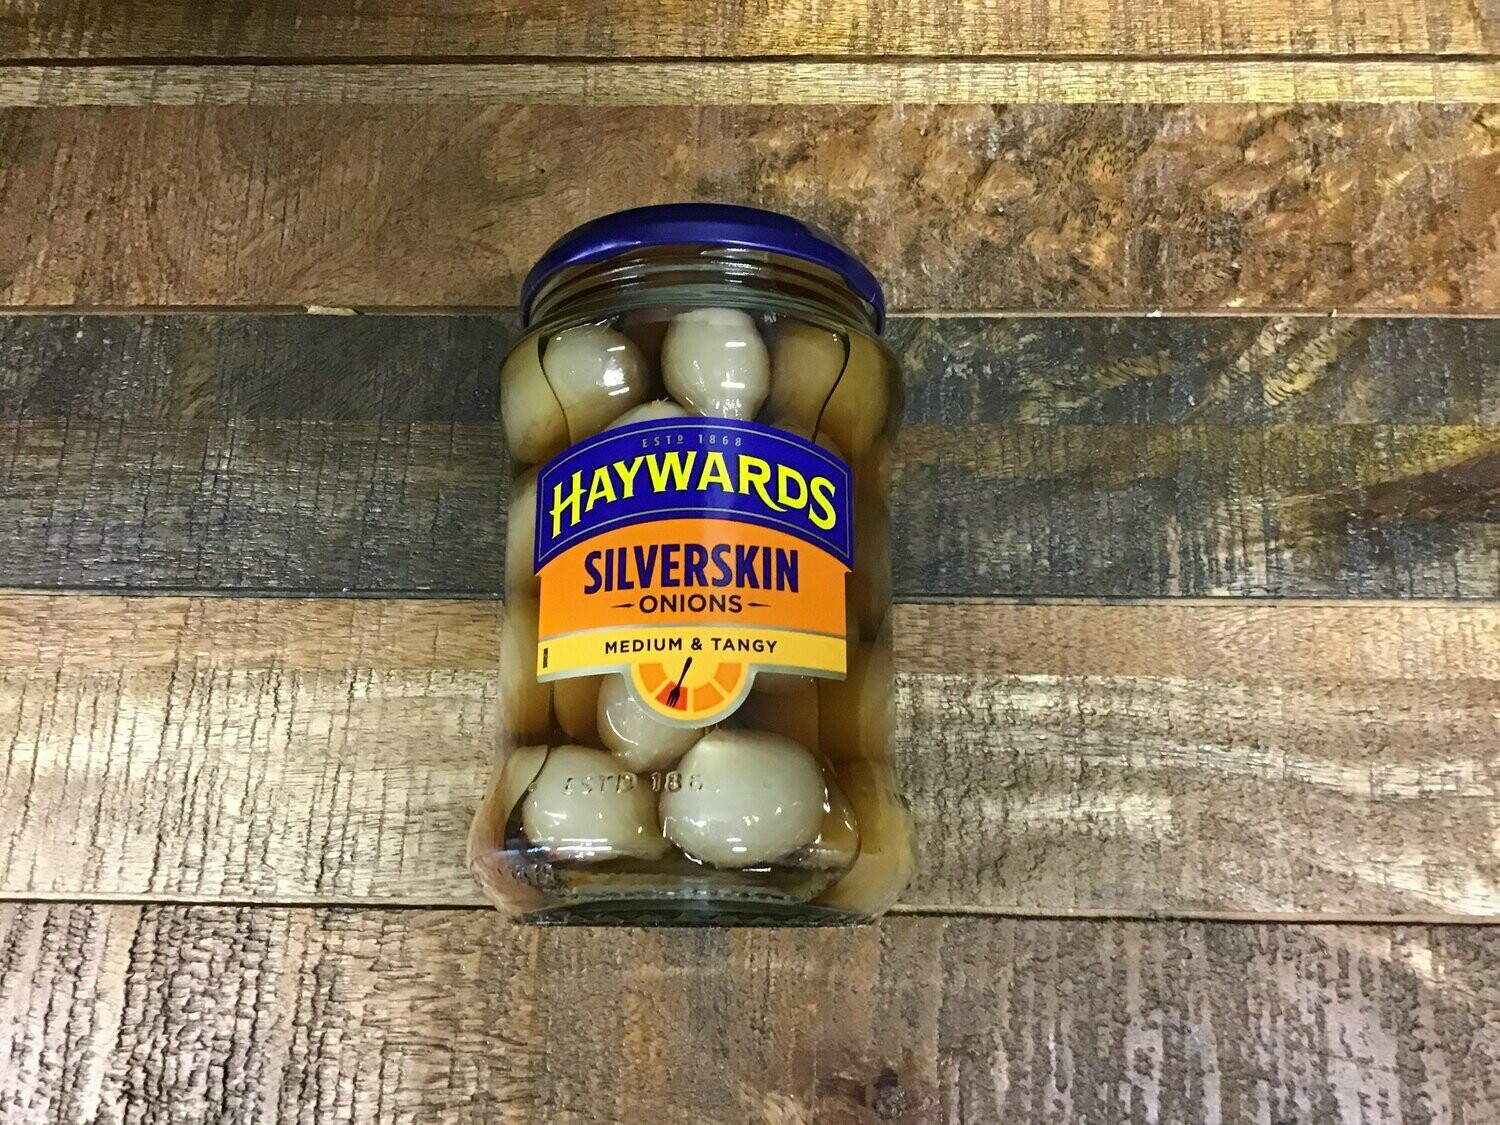 Haywards Silverskin Onions Medium And Tangy 400g